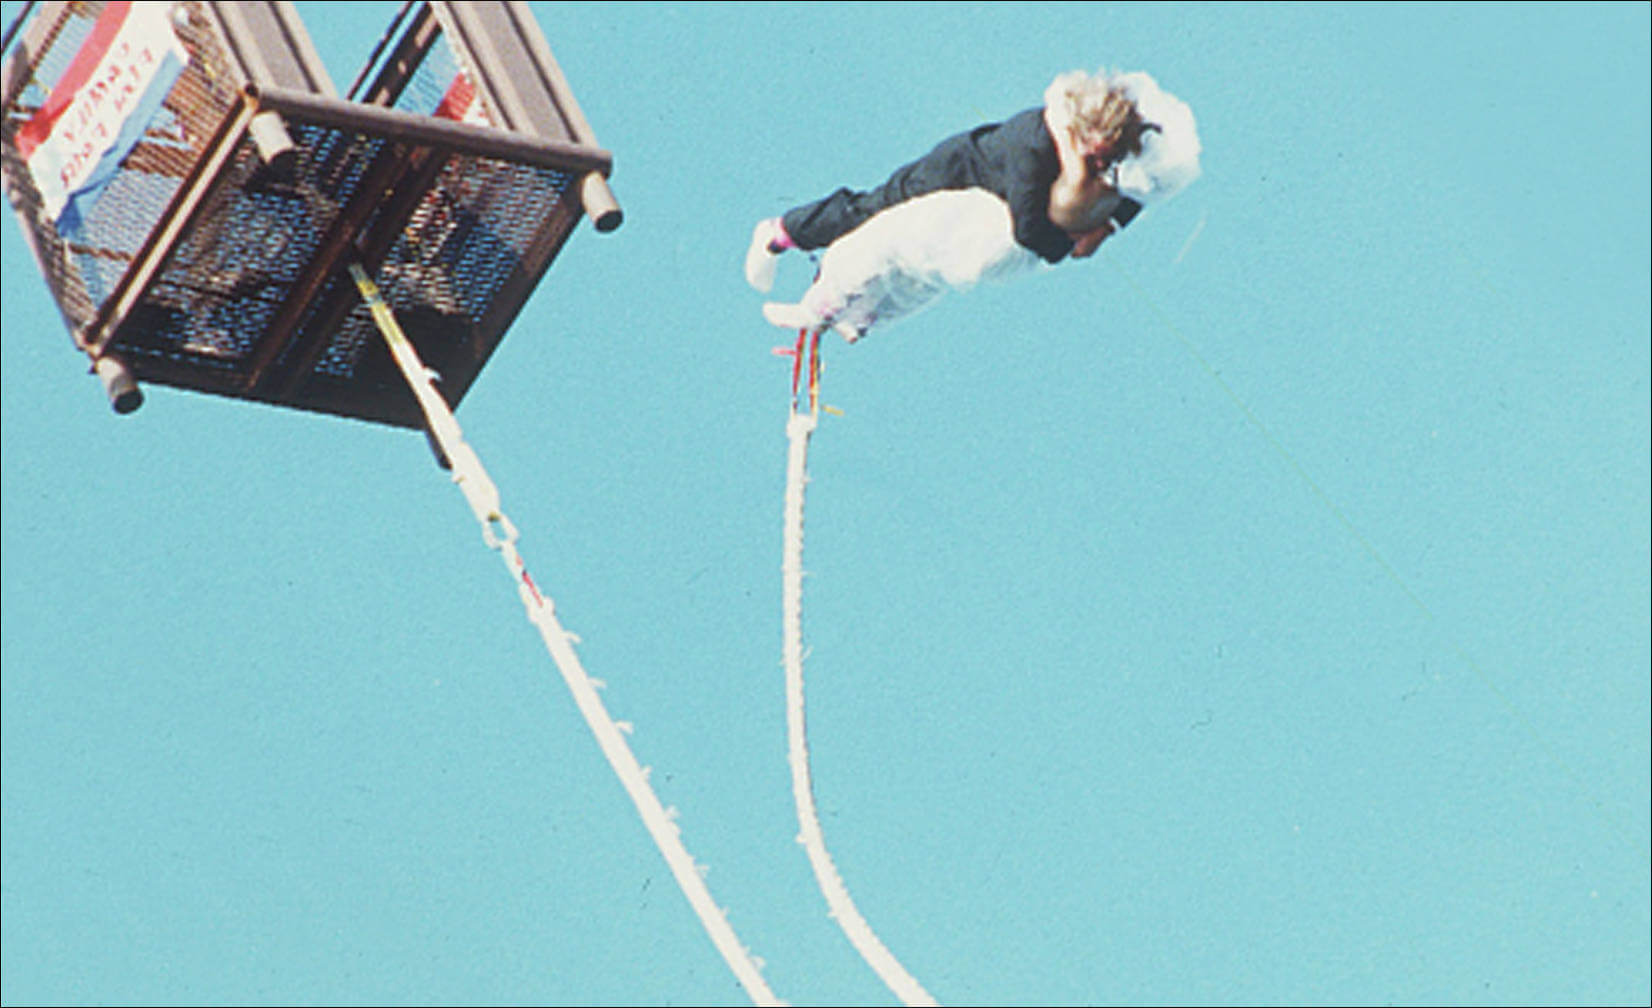 bungee jump together in Atlantic City, N.J after tying the knot